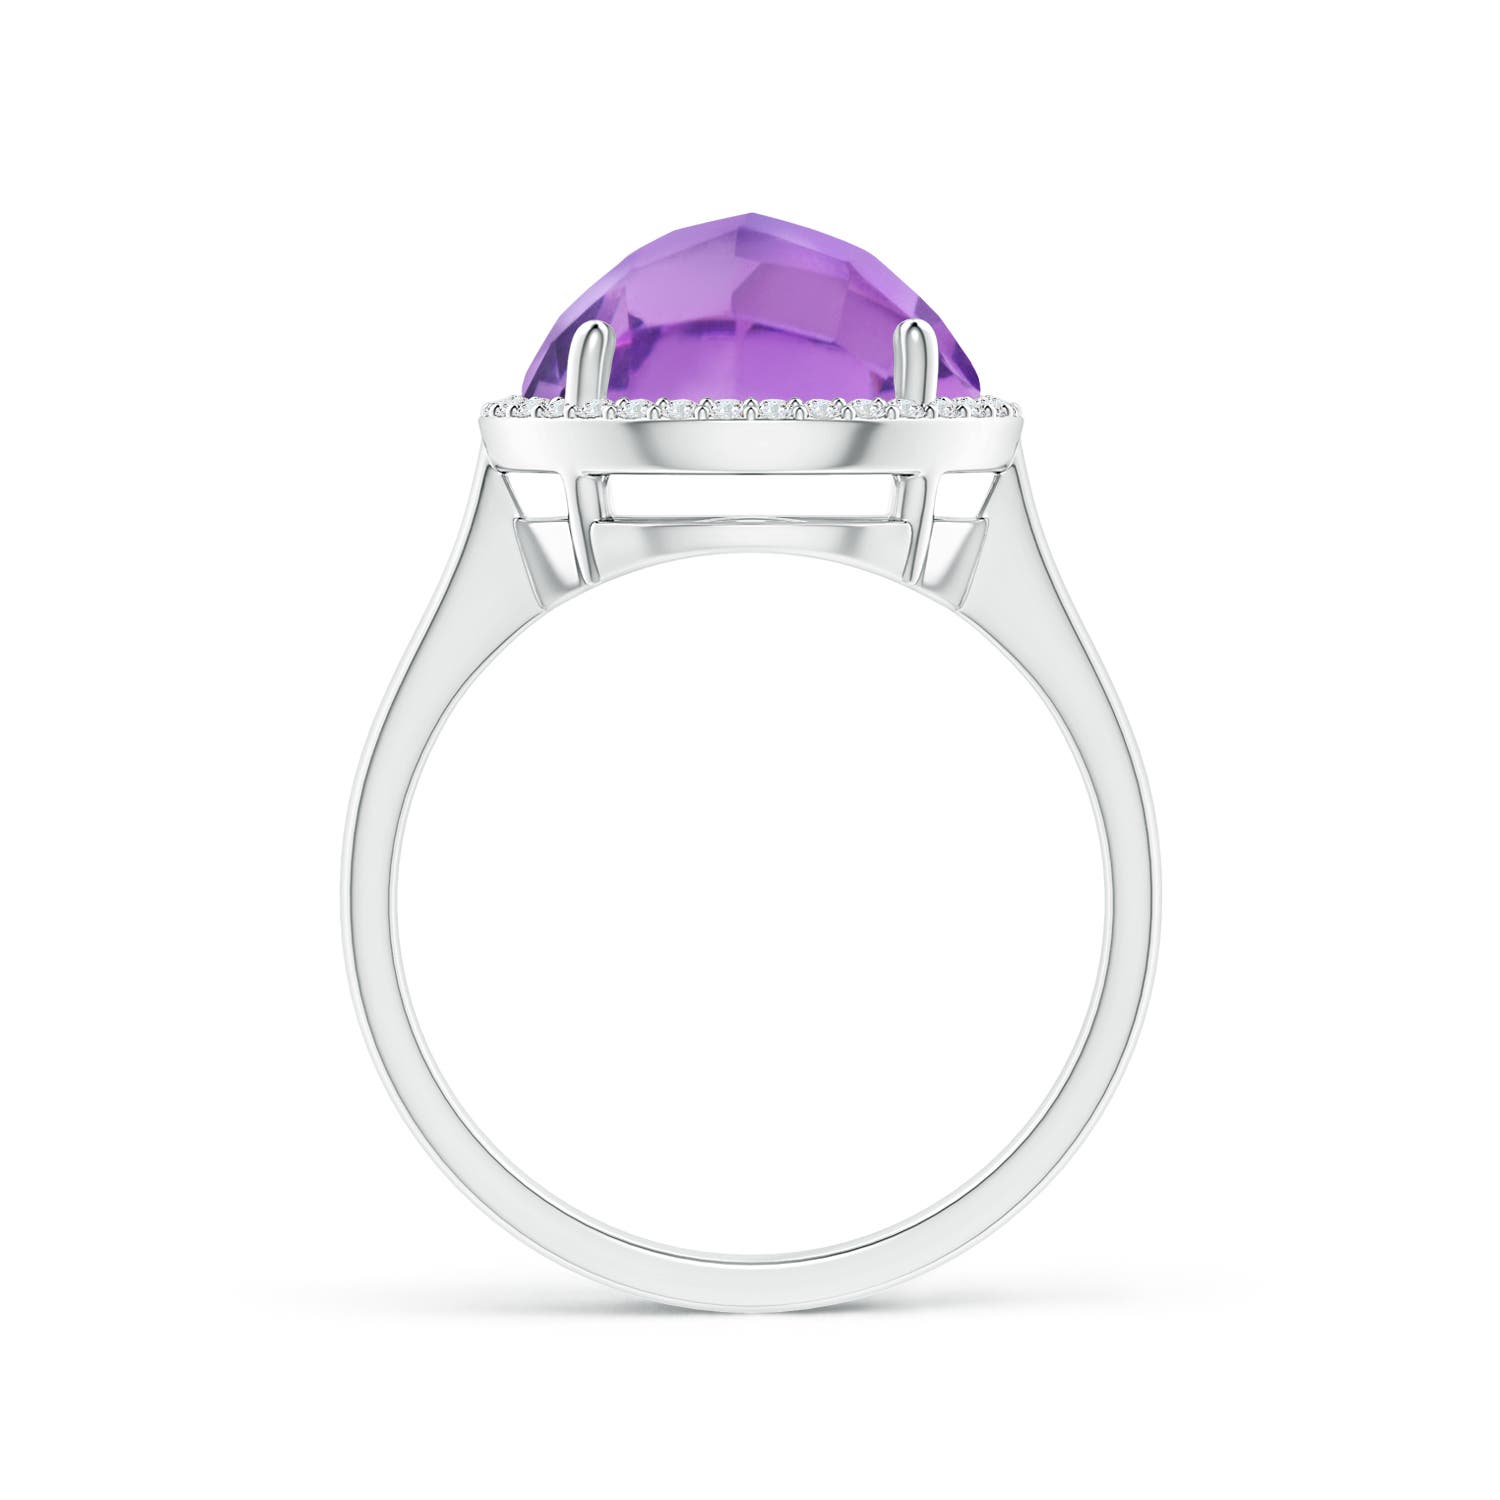 A - Amethyst / 5.02 CT / 14 KT White Gold